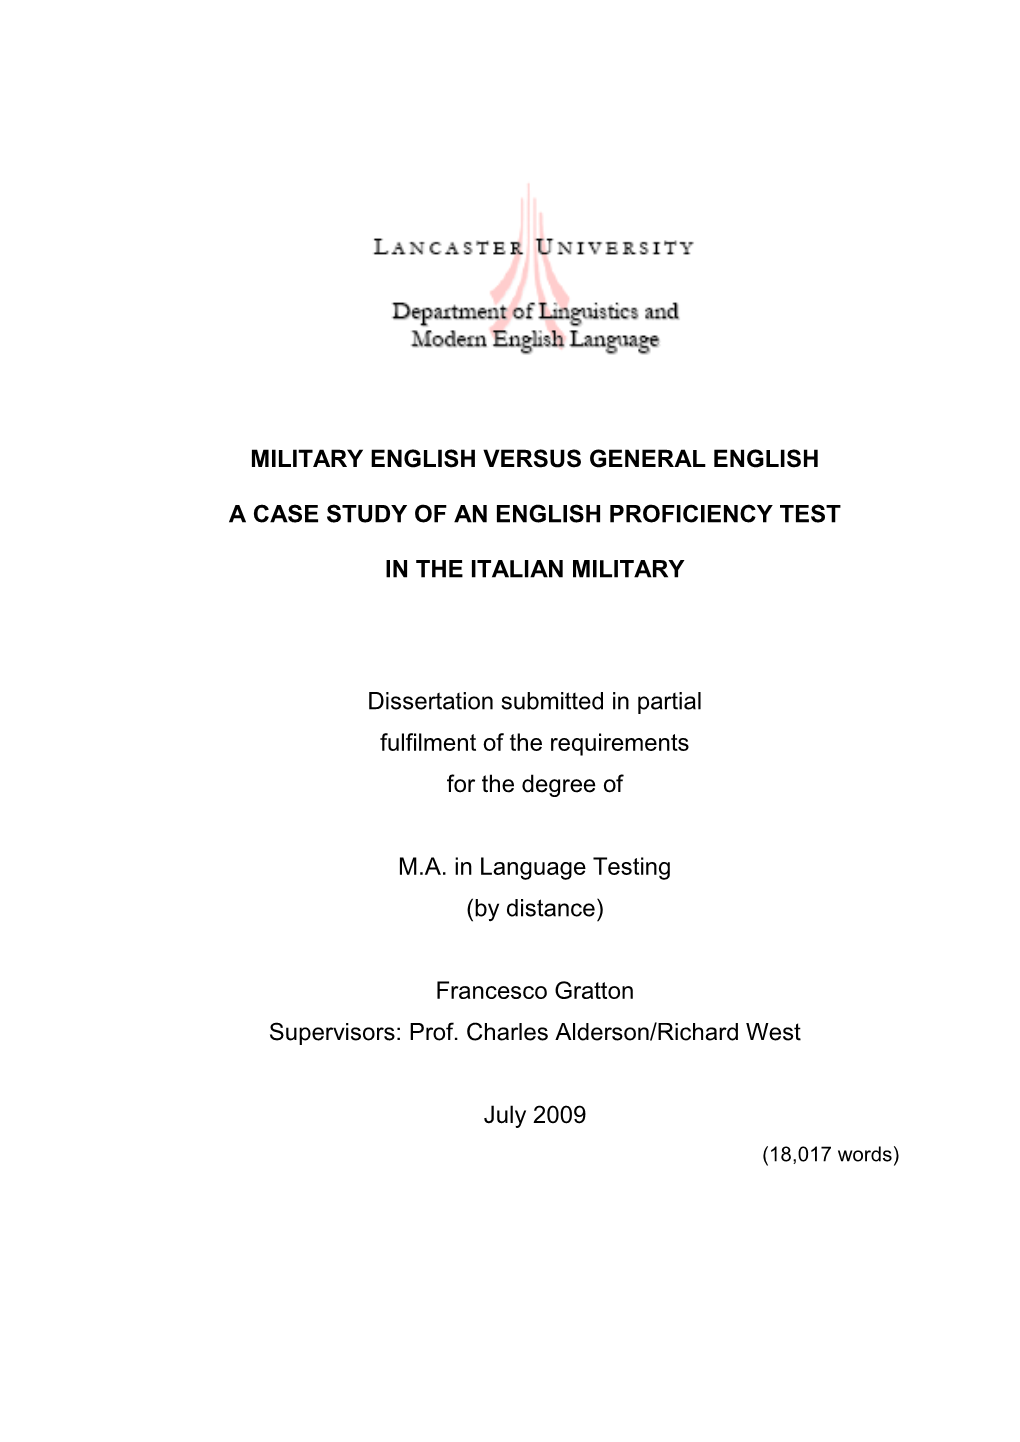 Military English Versus General English. a Case